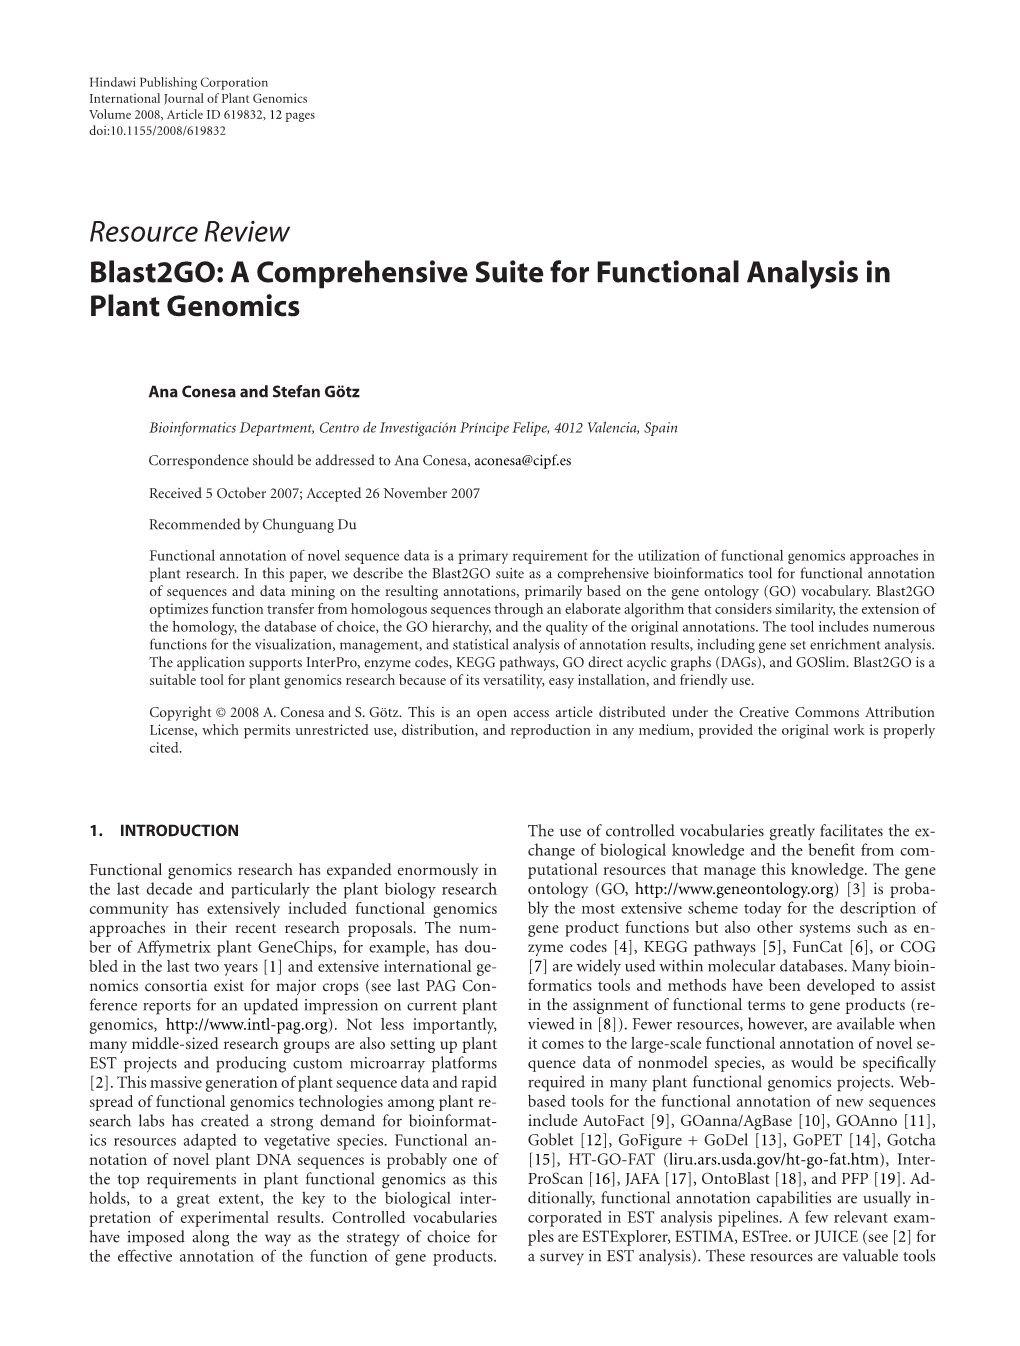 A Comprehensive Suite for Functional Analysis in Plant Genomics